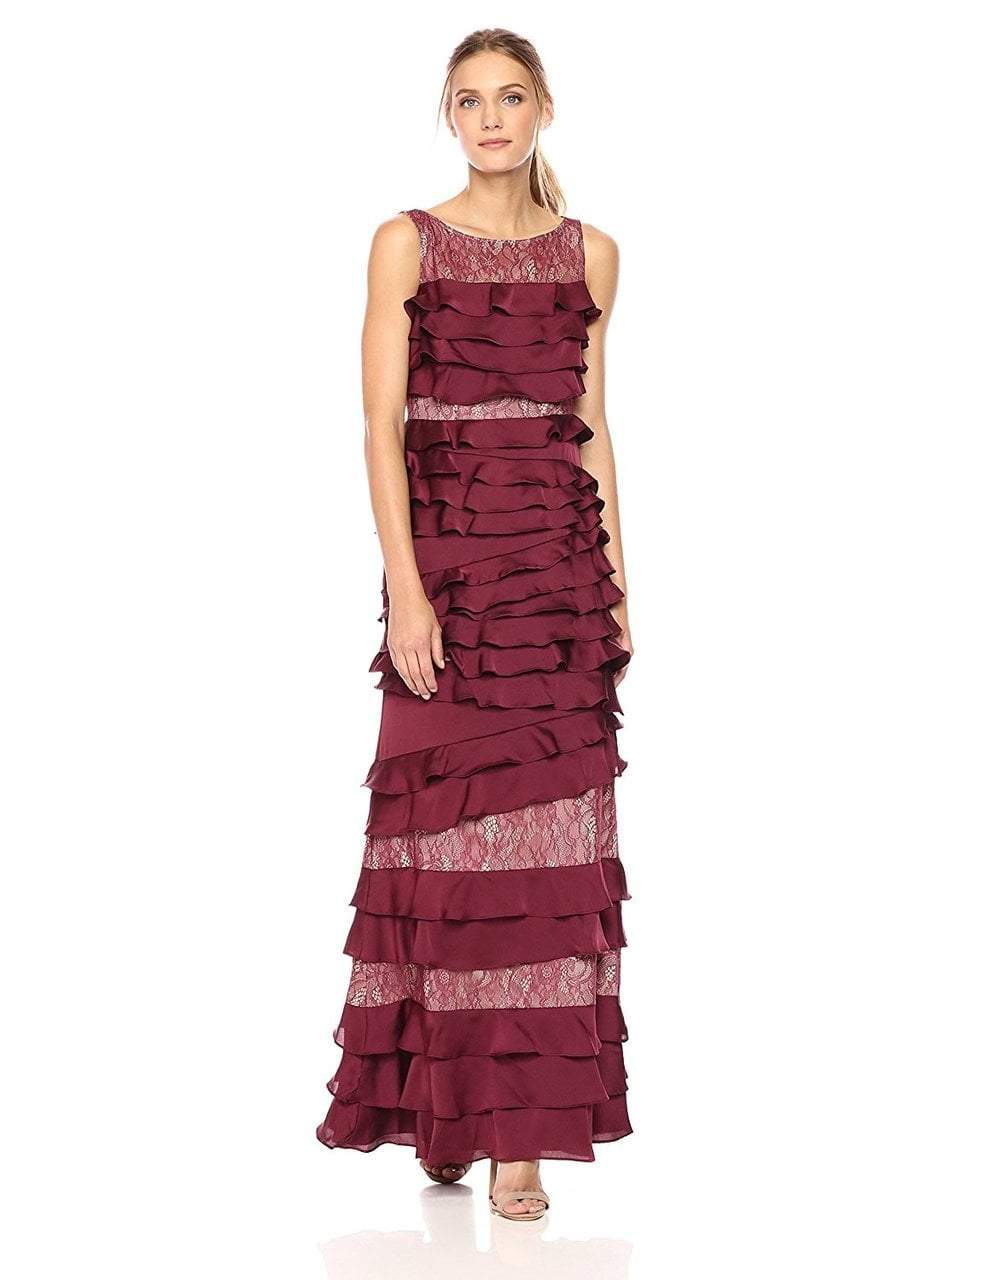  Adrianna Papell-Special Occasion Dress-COLOR-Black Cherry